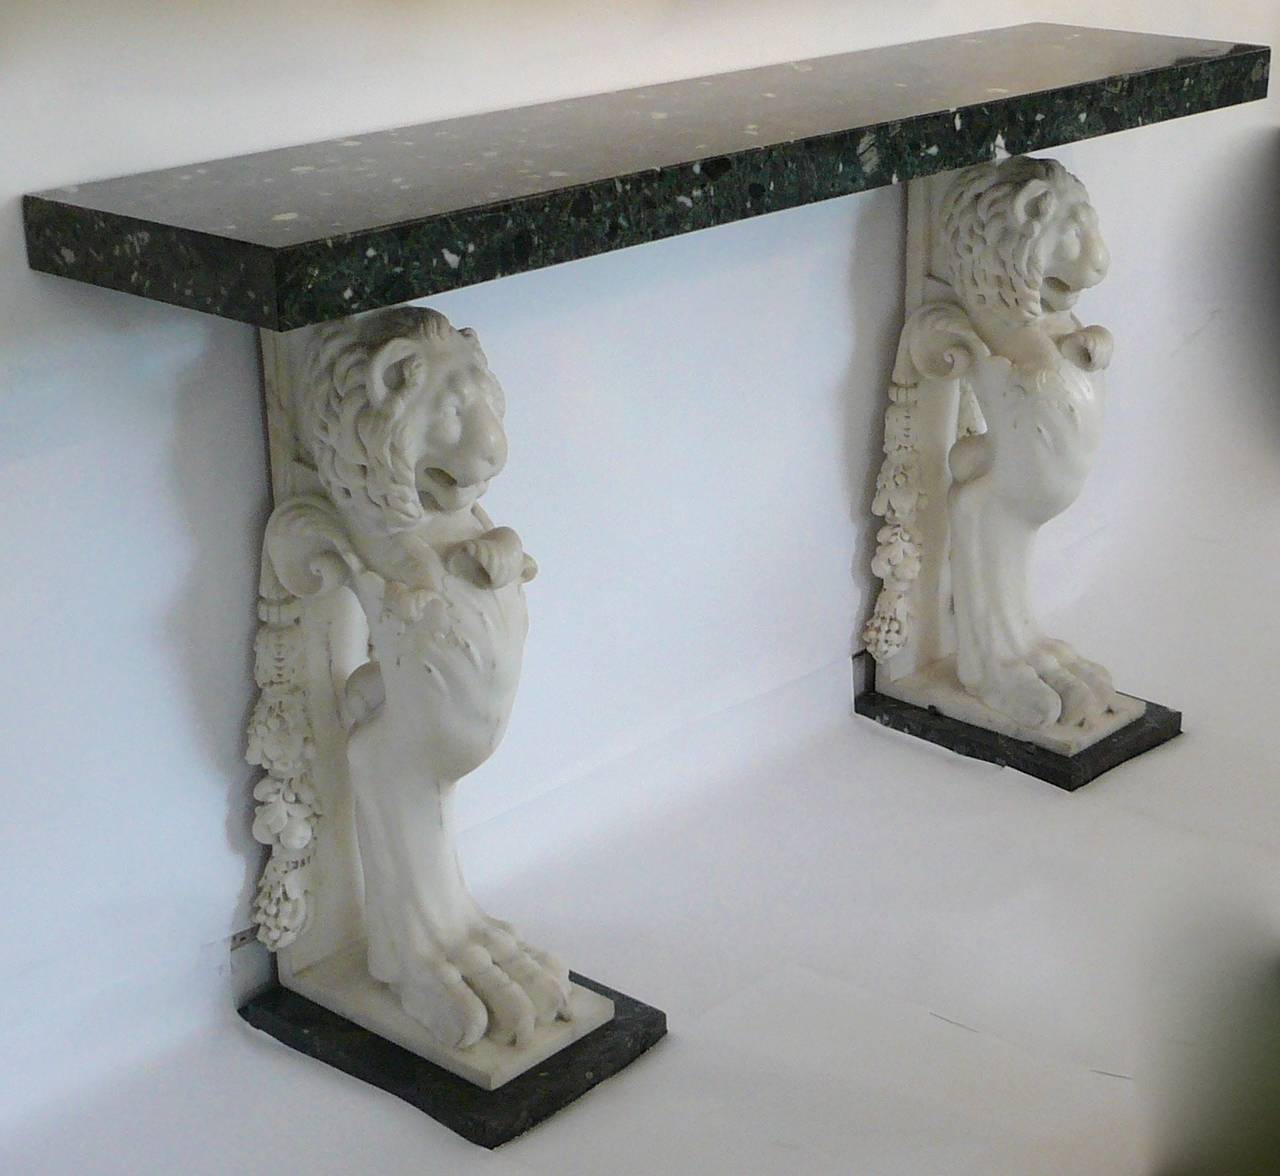 Impressive carved Carrara and Verde Antico marble console table from Farm Hill, the Sewickley Heights PA home of Edith Oliver Rea. She was the daughter of Henry Oliver, Americas 